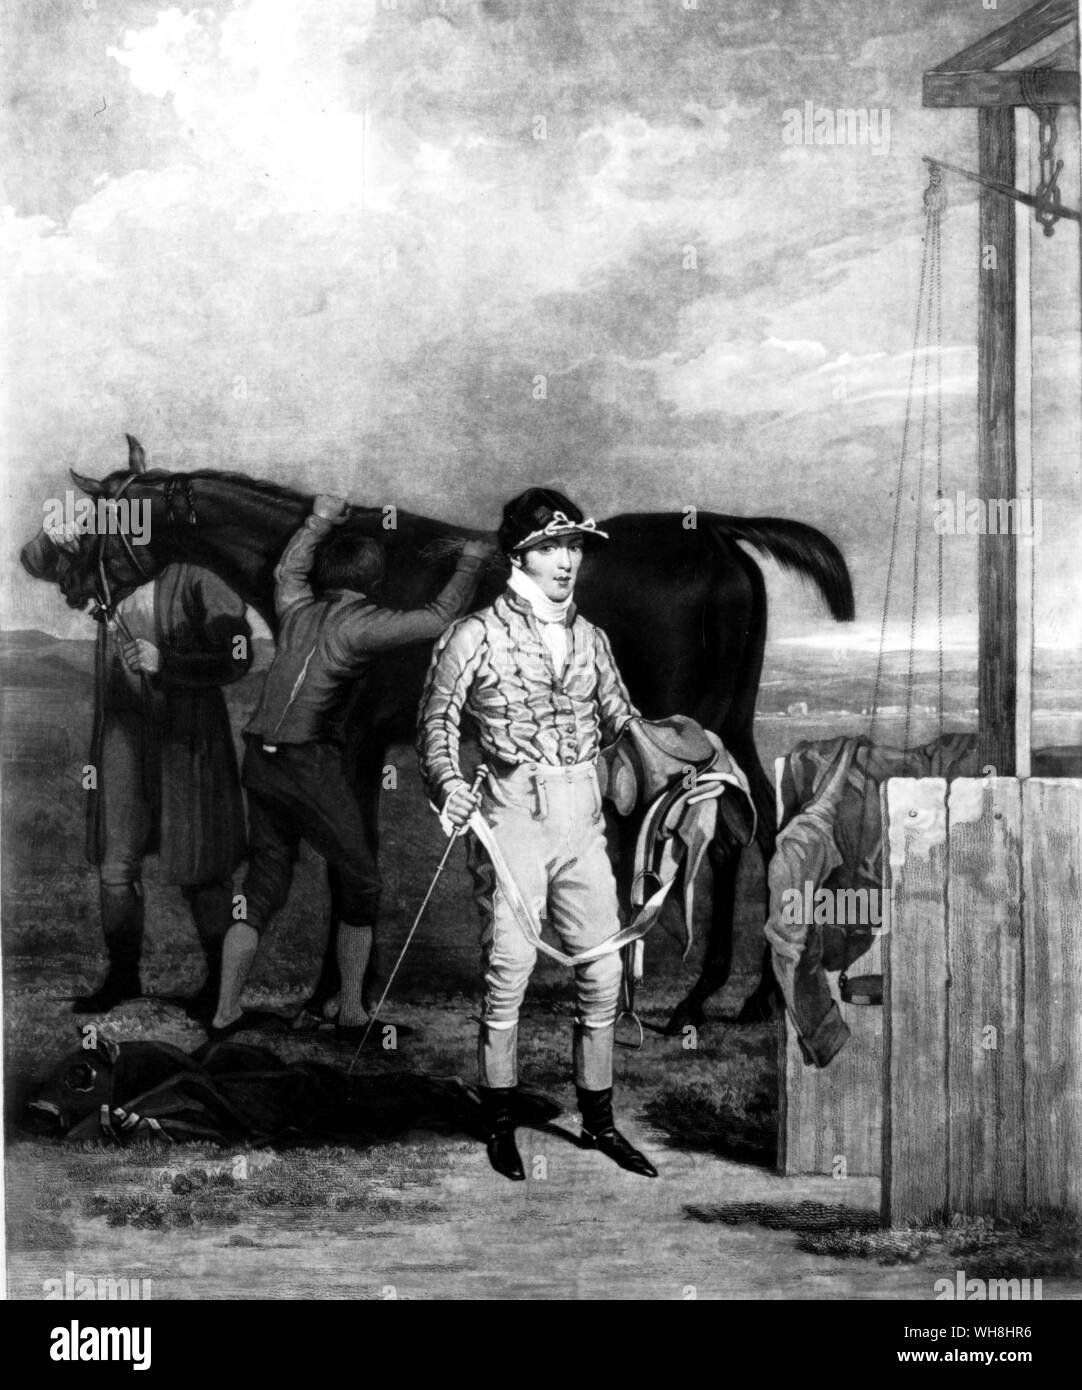 Sam Chifney Junior. 'Sylvanus' said: 'As for Sam, he was out-and-out the beau ideal of a jockey when in his prime. and for elegance of seat, perfection of hand, judgement of pace, and power in his saddle, was excelled by no man who ever sat in one.' Chifney (1786-1855) is here shown at 21, returning to scale. Five years later he blatently stopped the favourite Manuella in the Derby of 1812. He won the Derbys of 1818 and 1820 for 'Squire' Thornhill, who gave enough money to outweigh the bribes of the legs. He became so lazy that his last years were spent in a kind of stupor. The History of Stock Photo